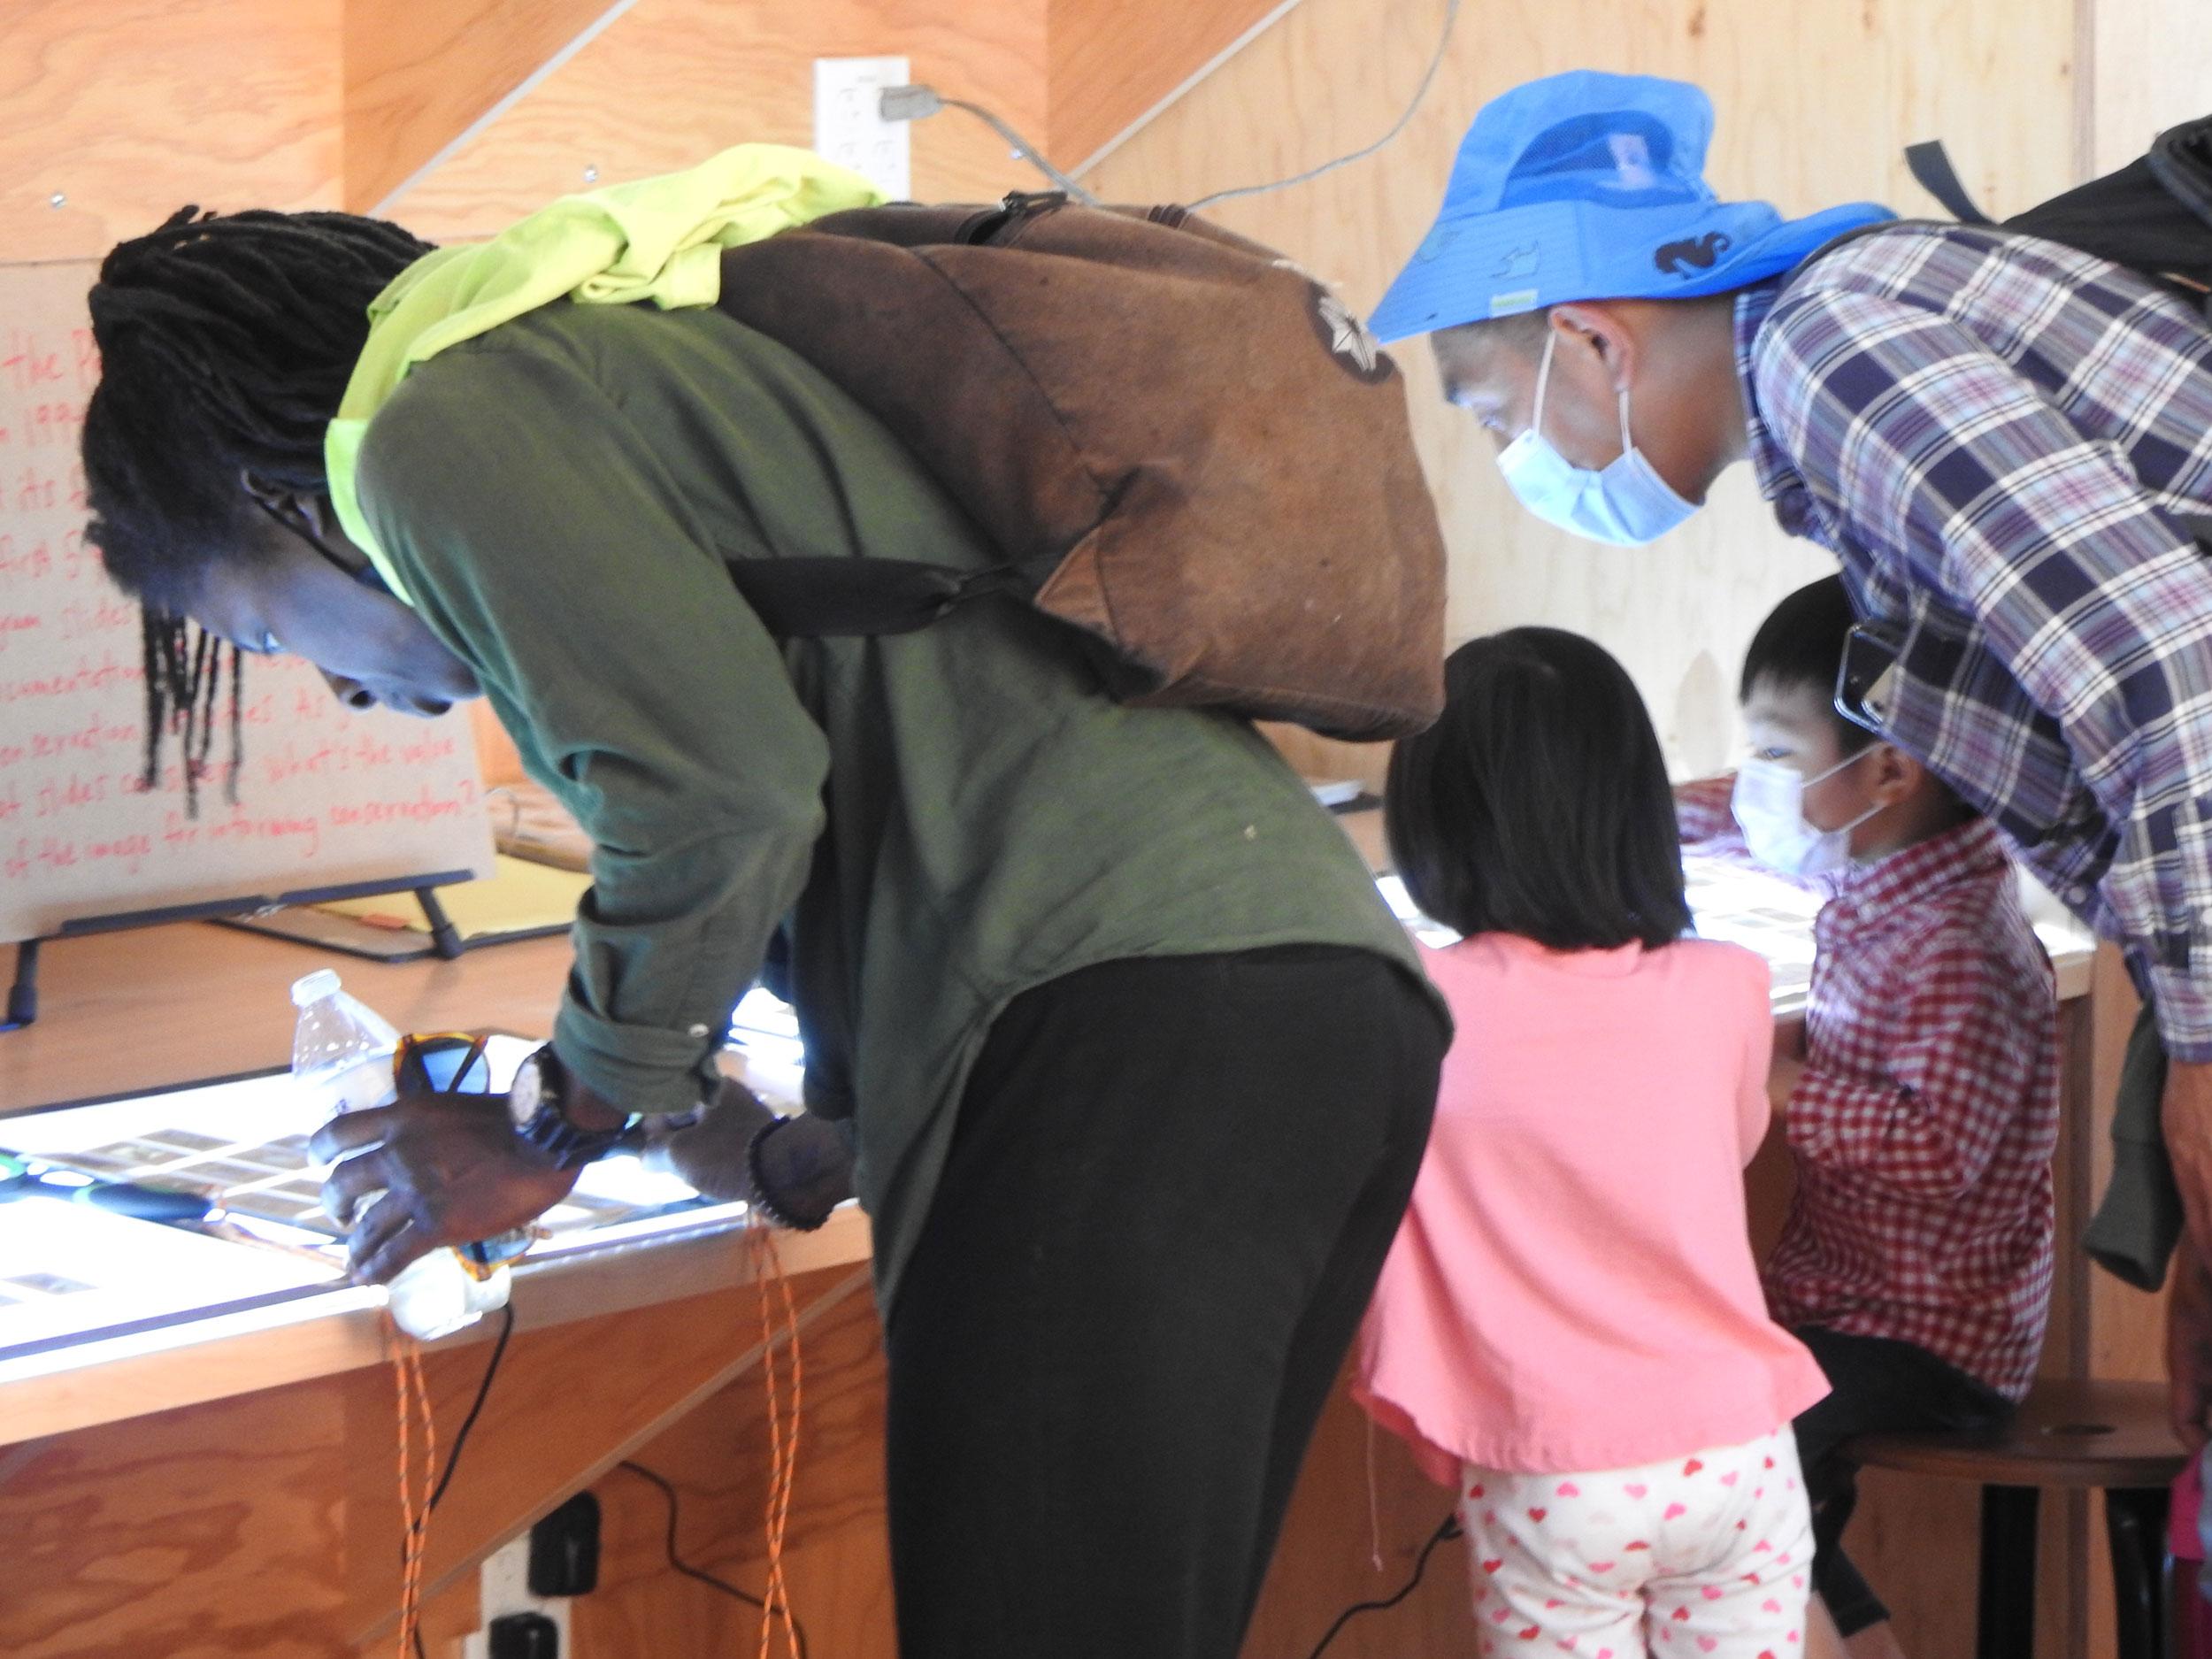 Adults and kids study images at the Field Station.